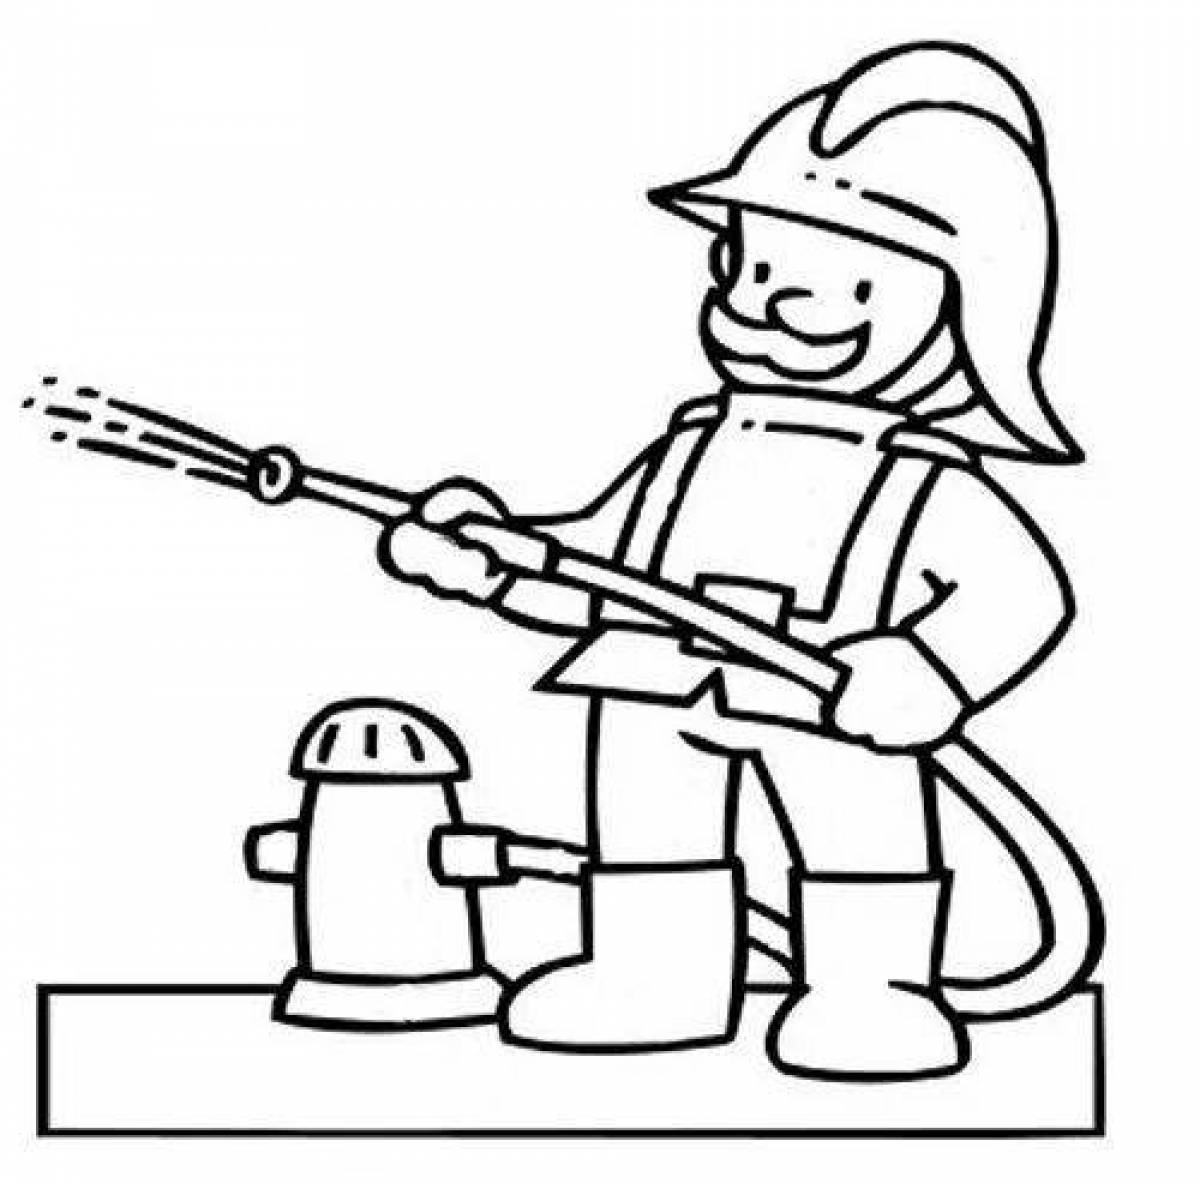 Colorful job coloring pages for pre-k in kindergarten